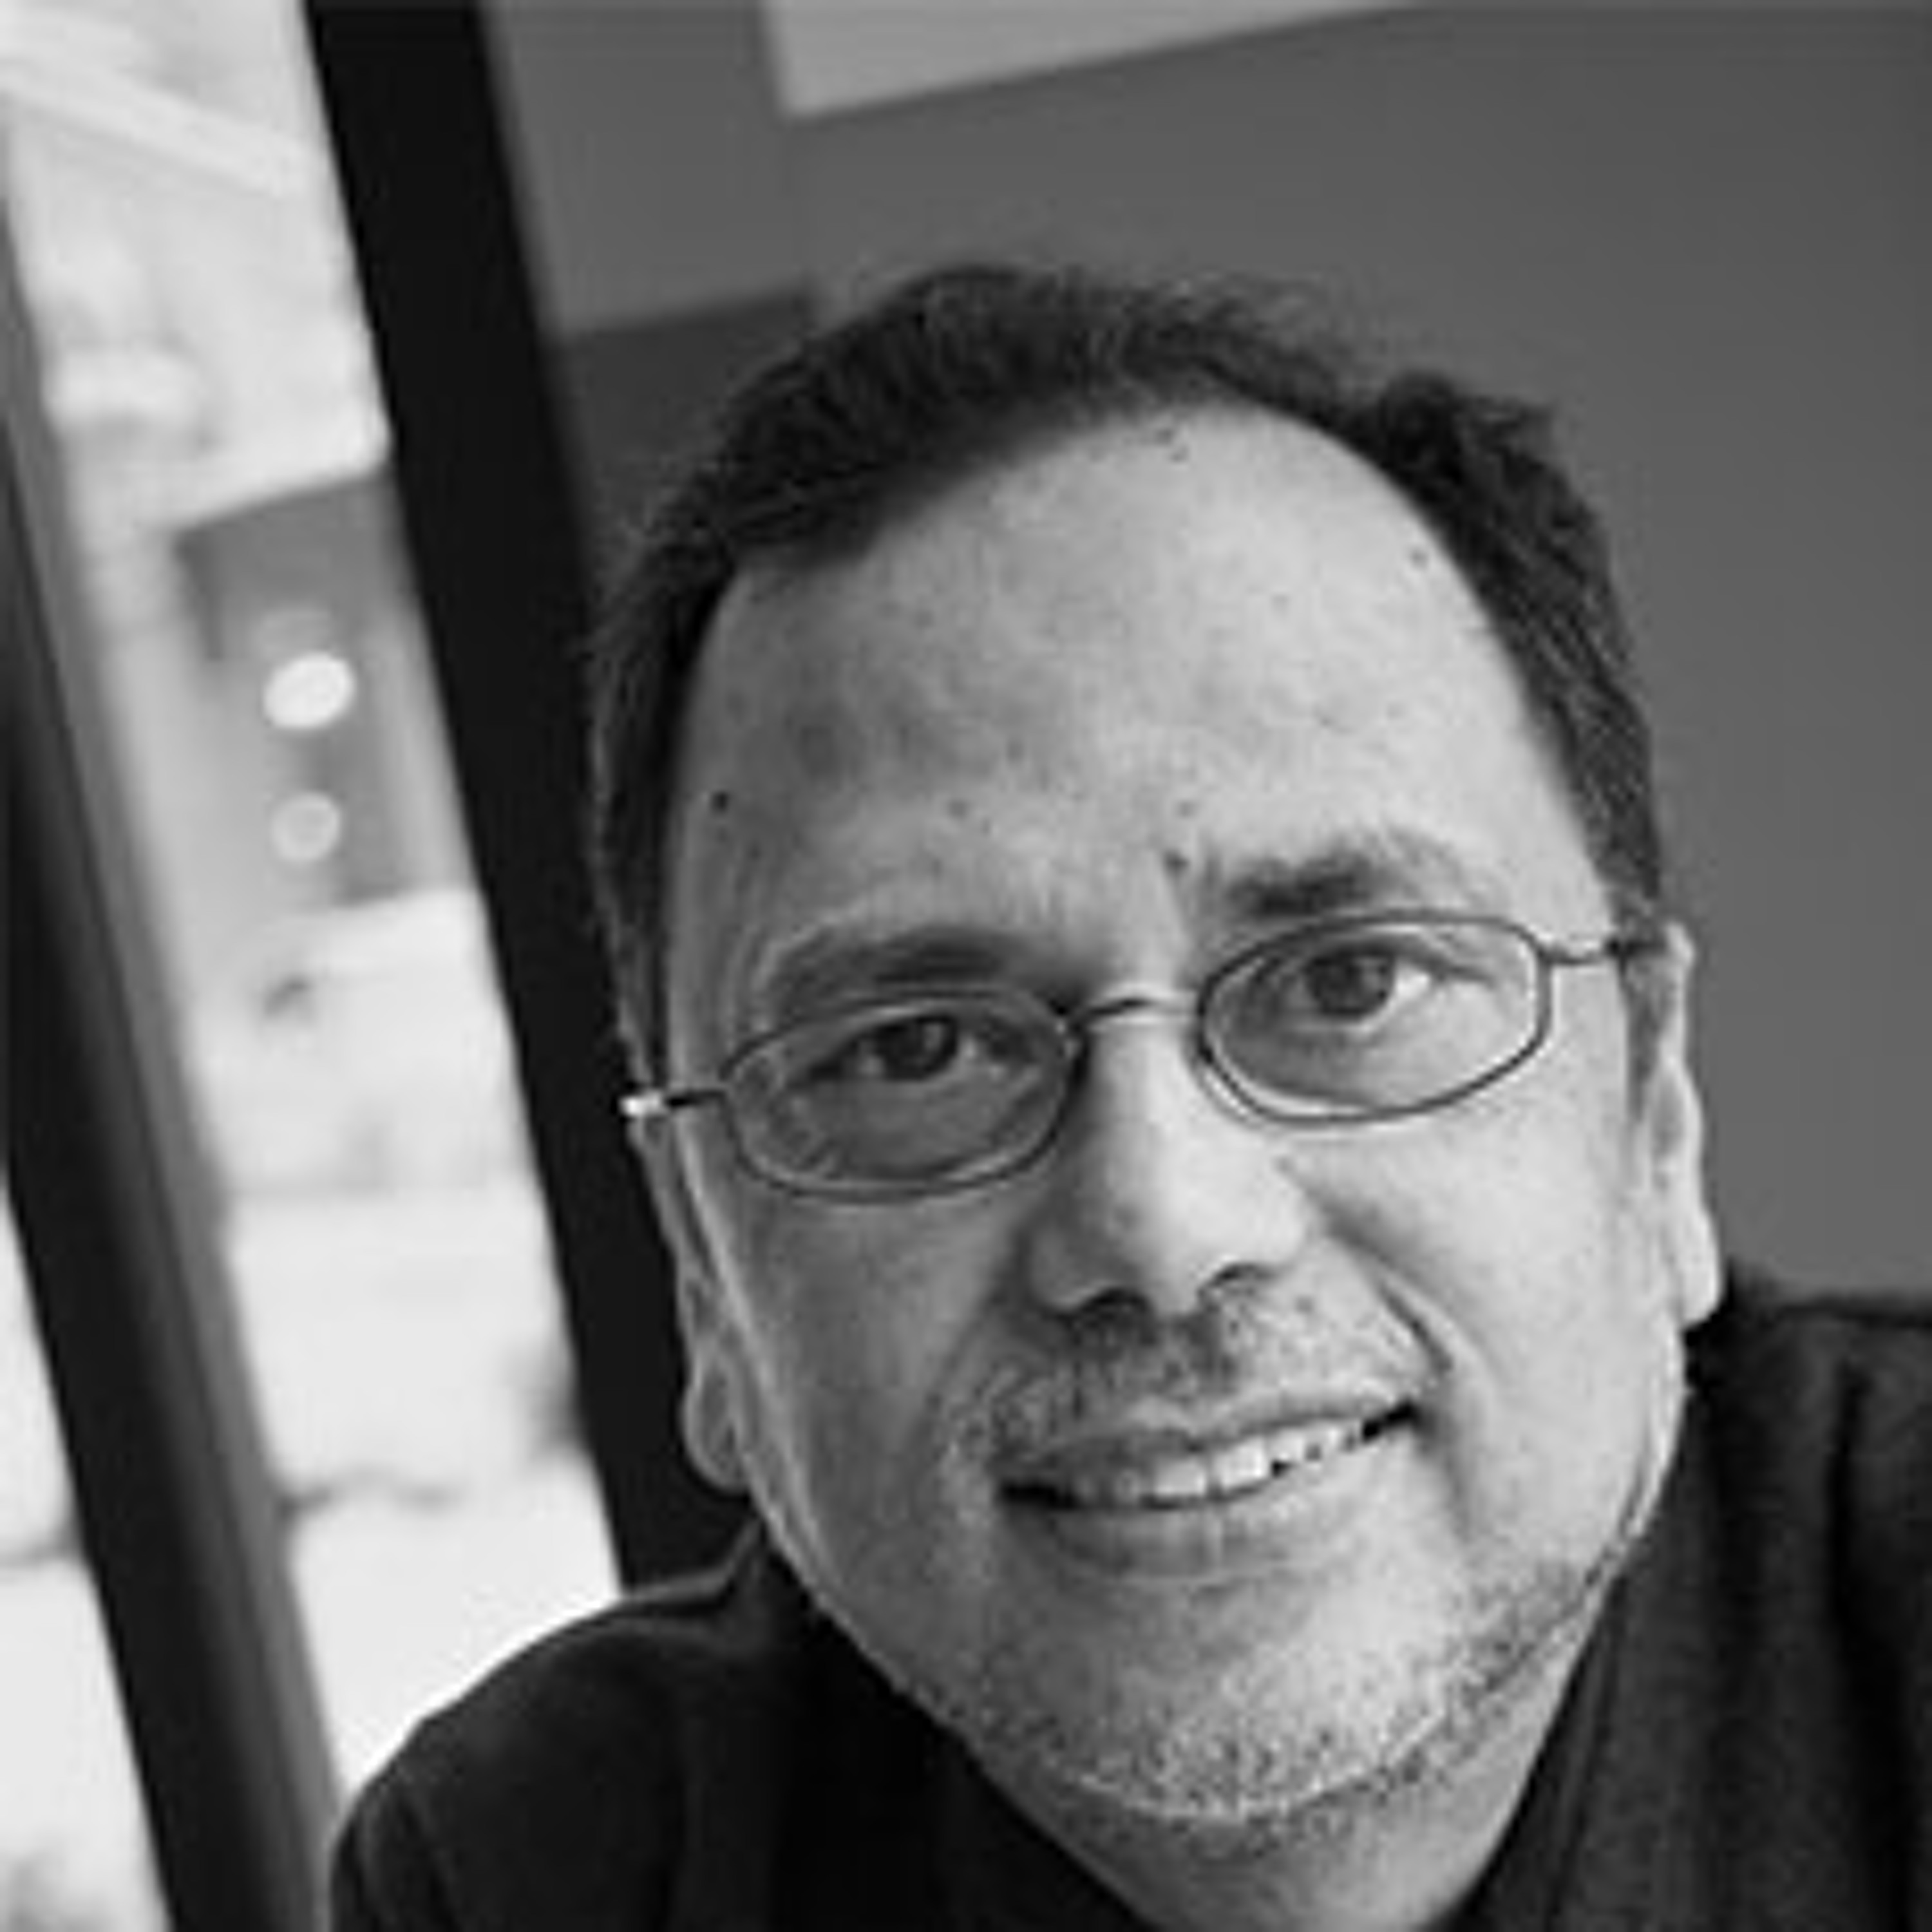 Climate + Capital: A conversation with Prof Dipesh Chakrabarty